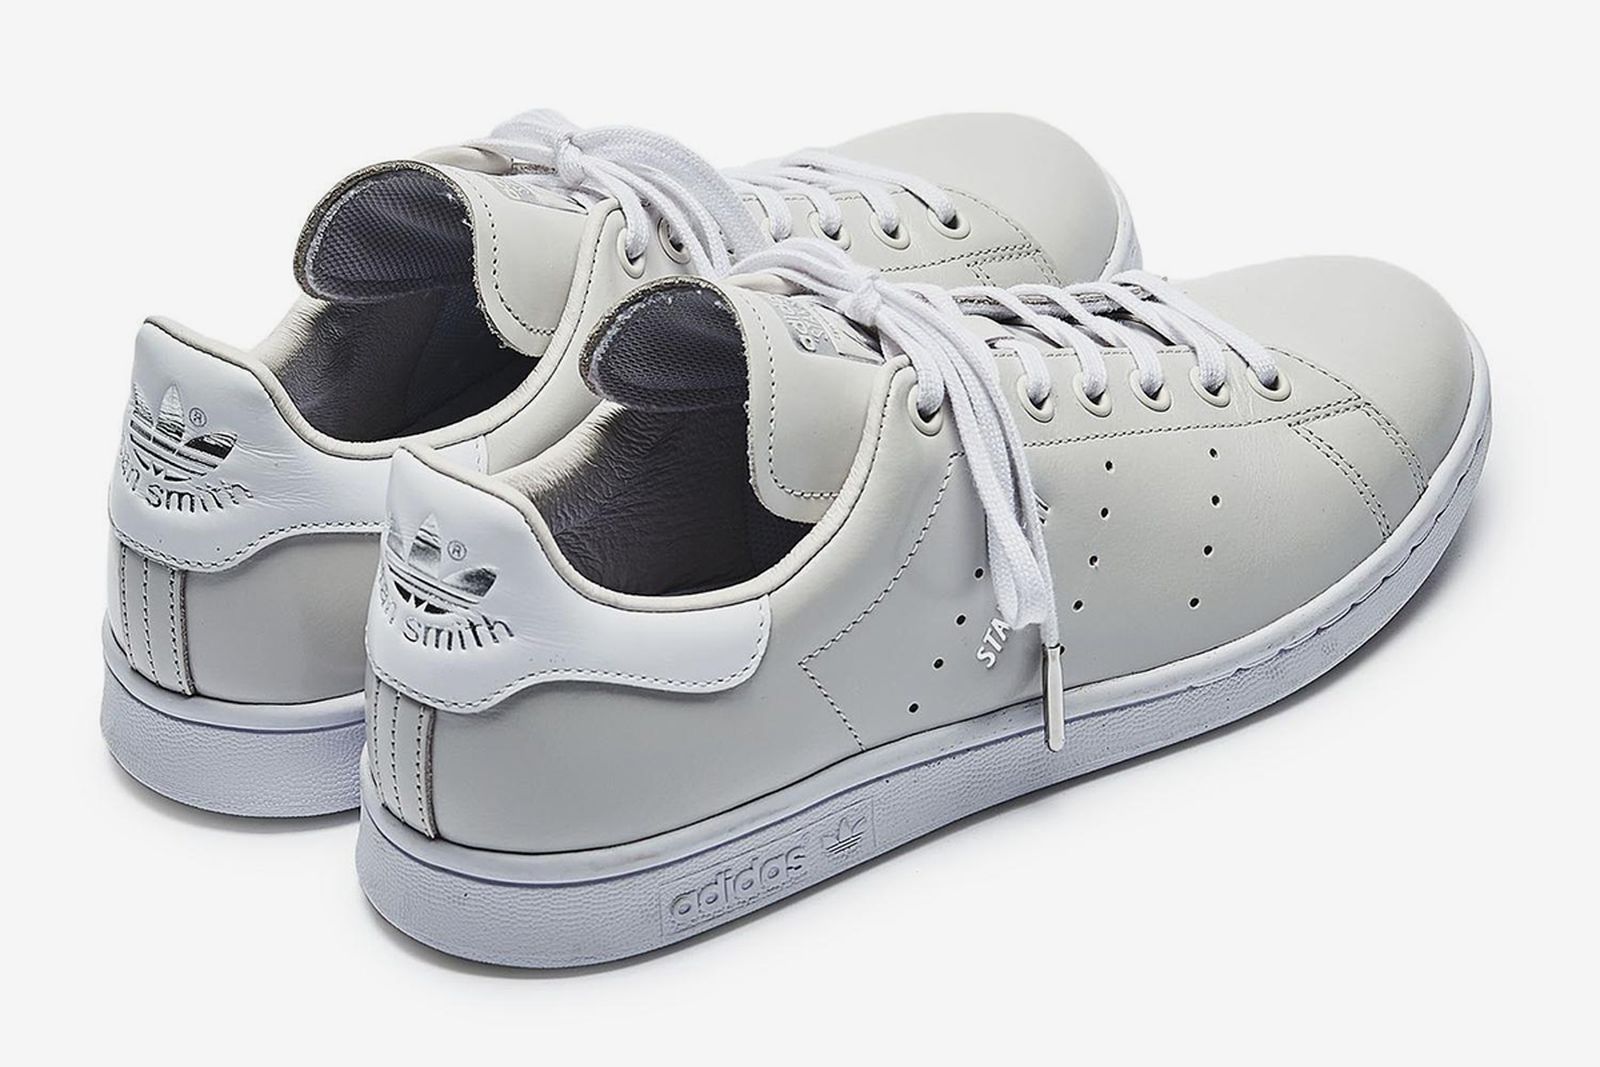 beauty-and-youth-adidas-stan-smith-release-date-price-11